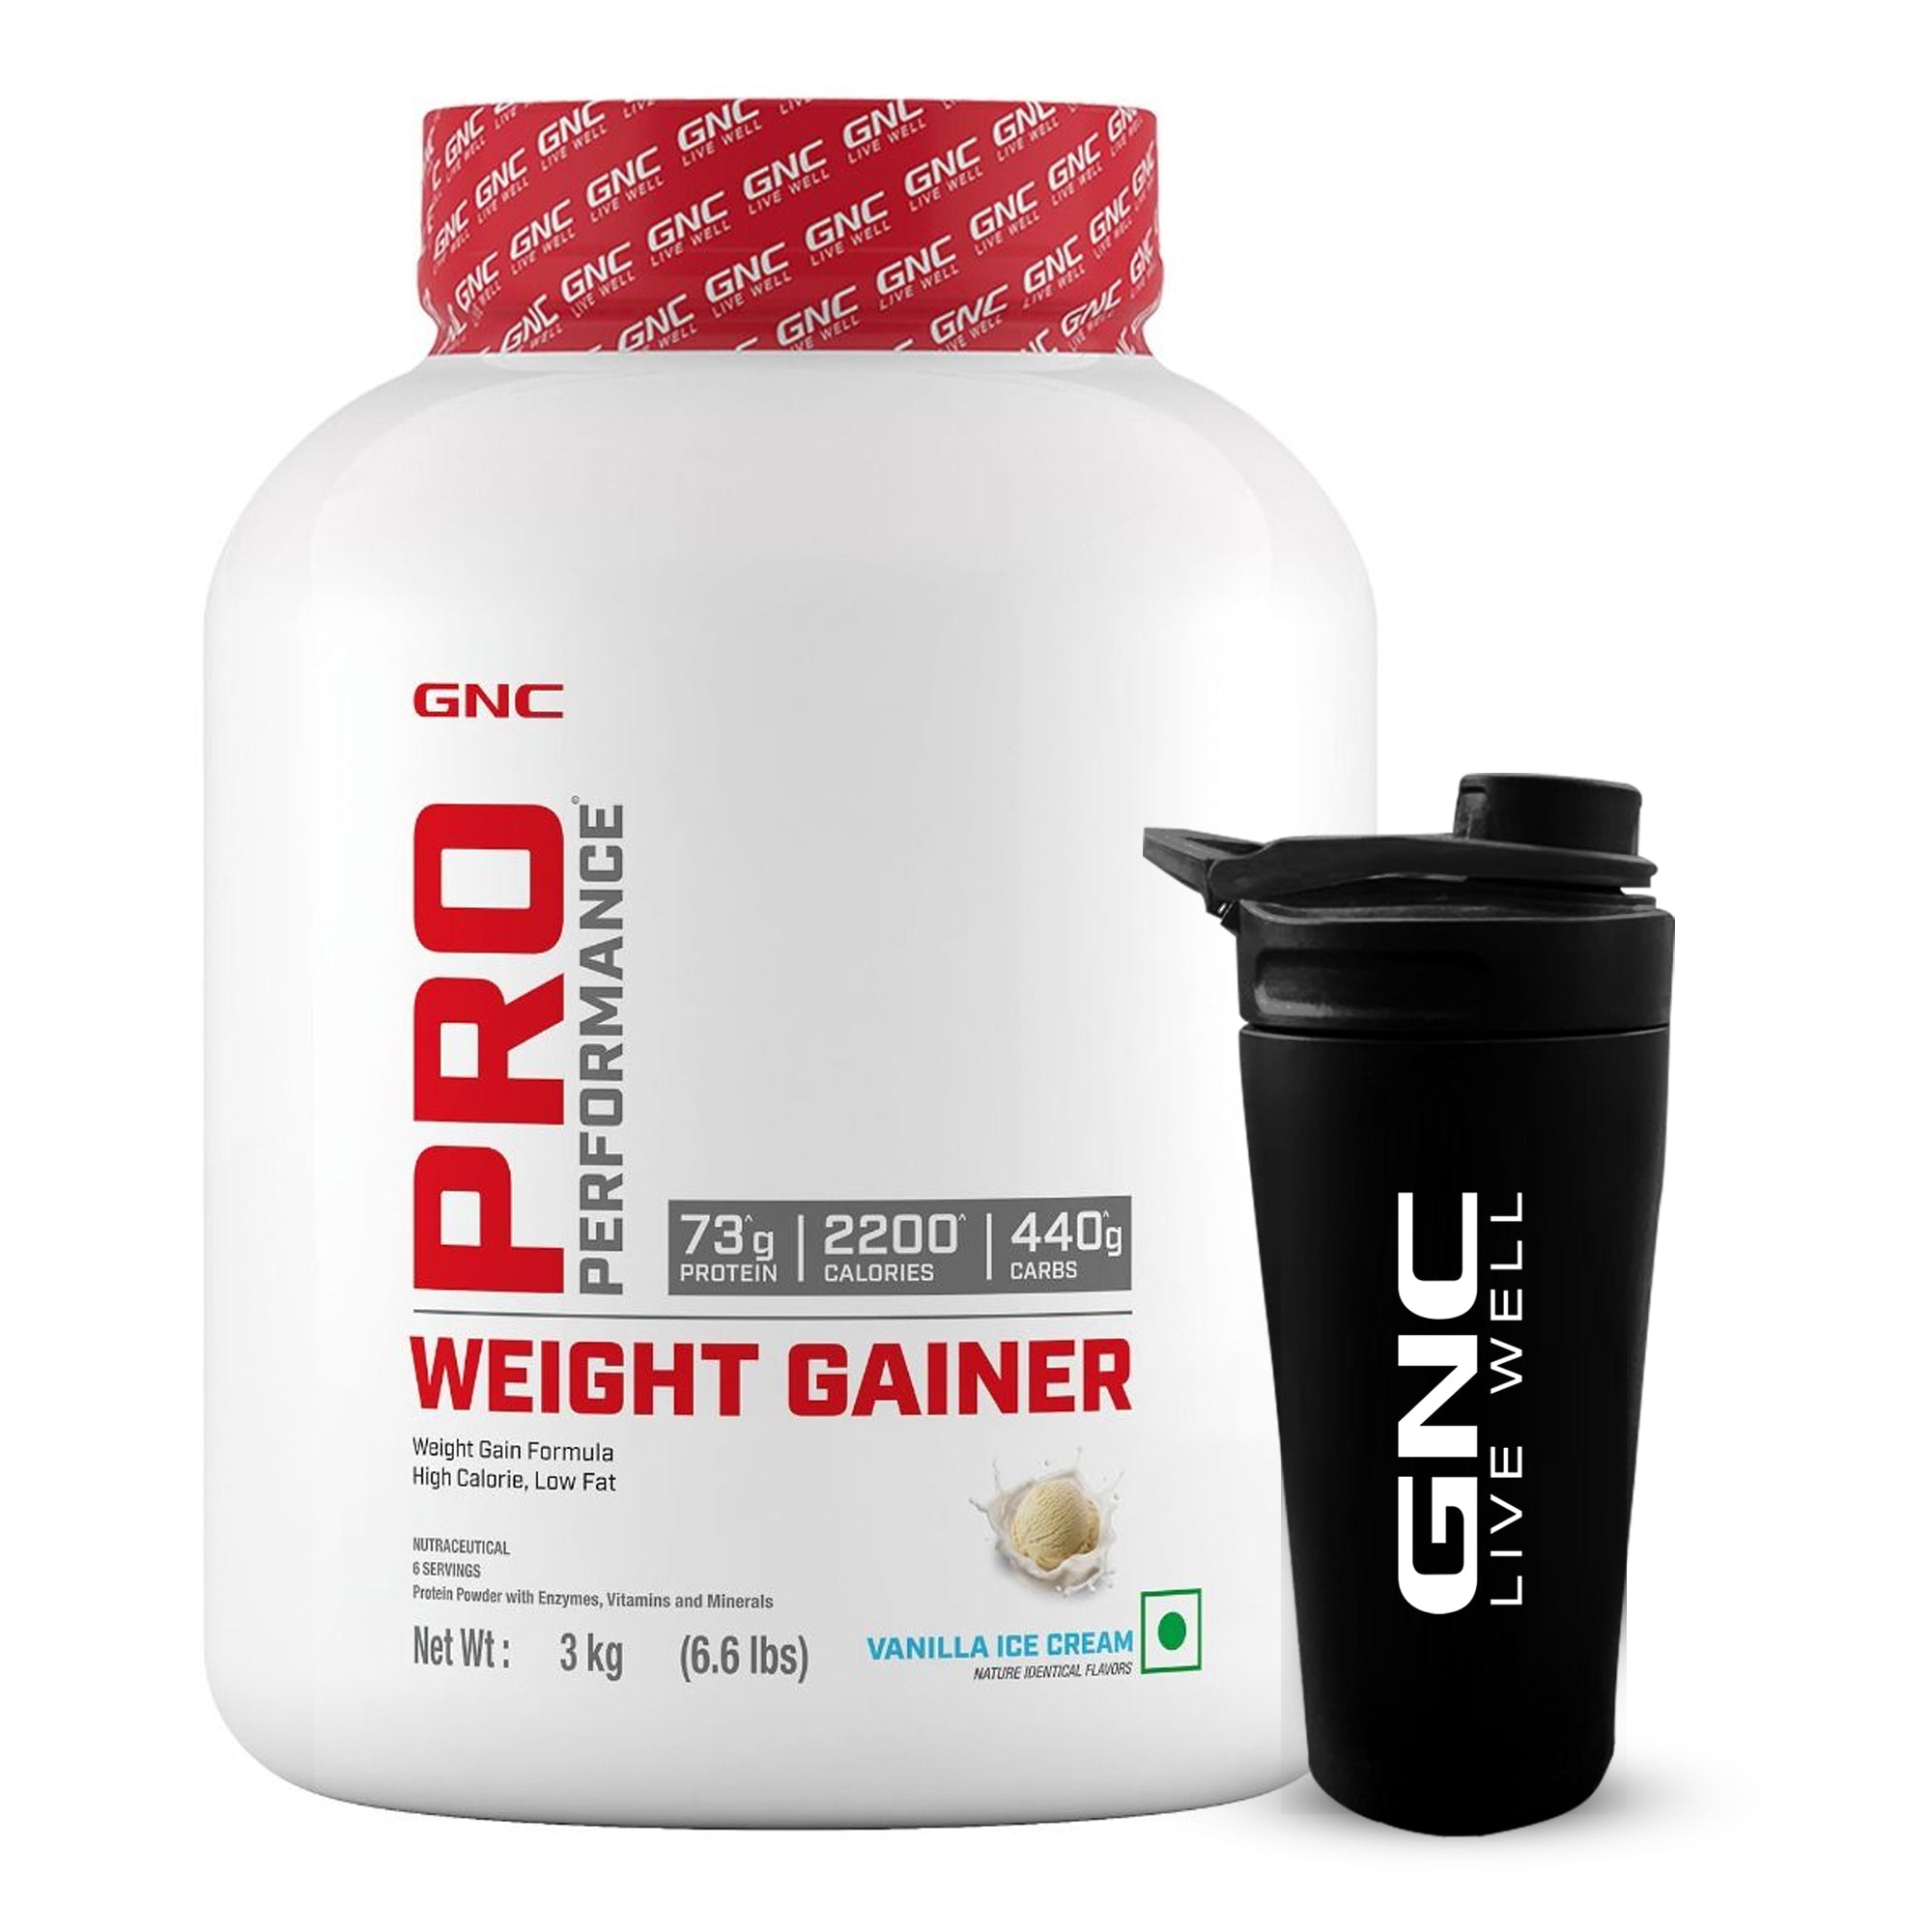 GNC Pro Performance Weight Gainer 3KG with Shaker - High-Calorie, Low-Fat Formula For Healthy Body Gains